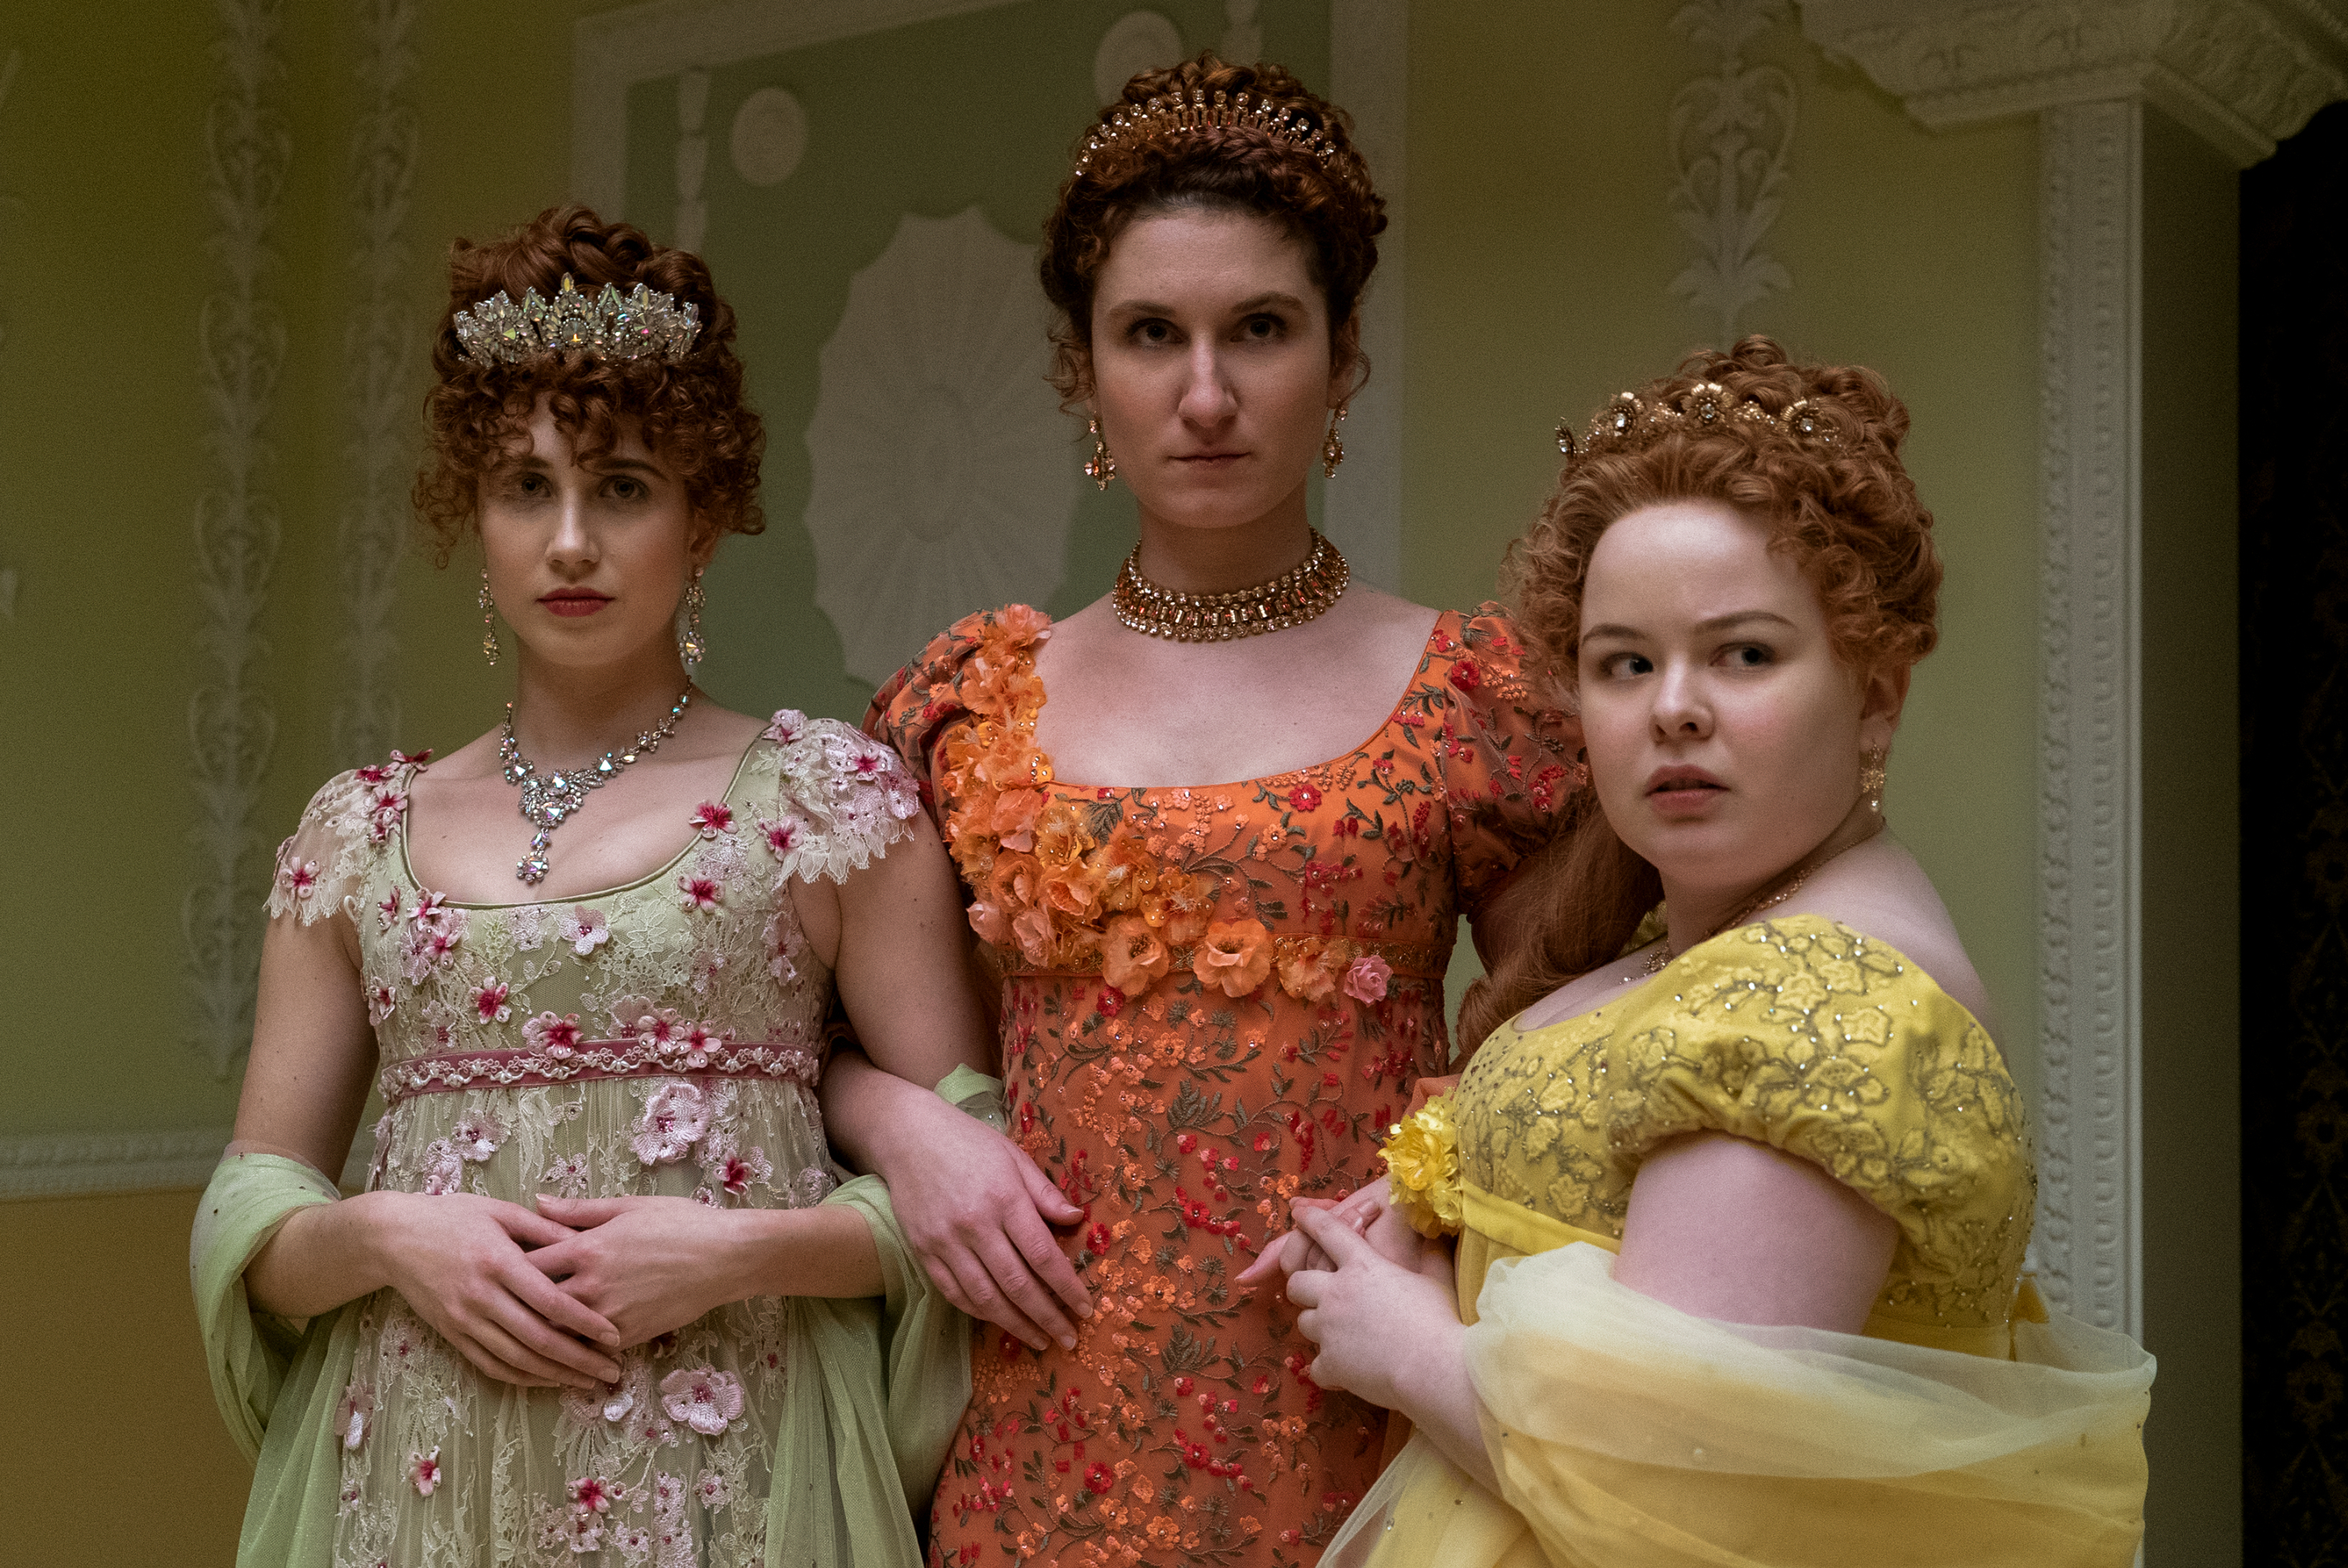 Three characters from Bridgerton in period costumes; one in green with pink flowers, middle in ornate orange, and one in yellow with ruffles